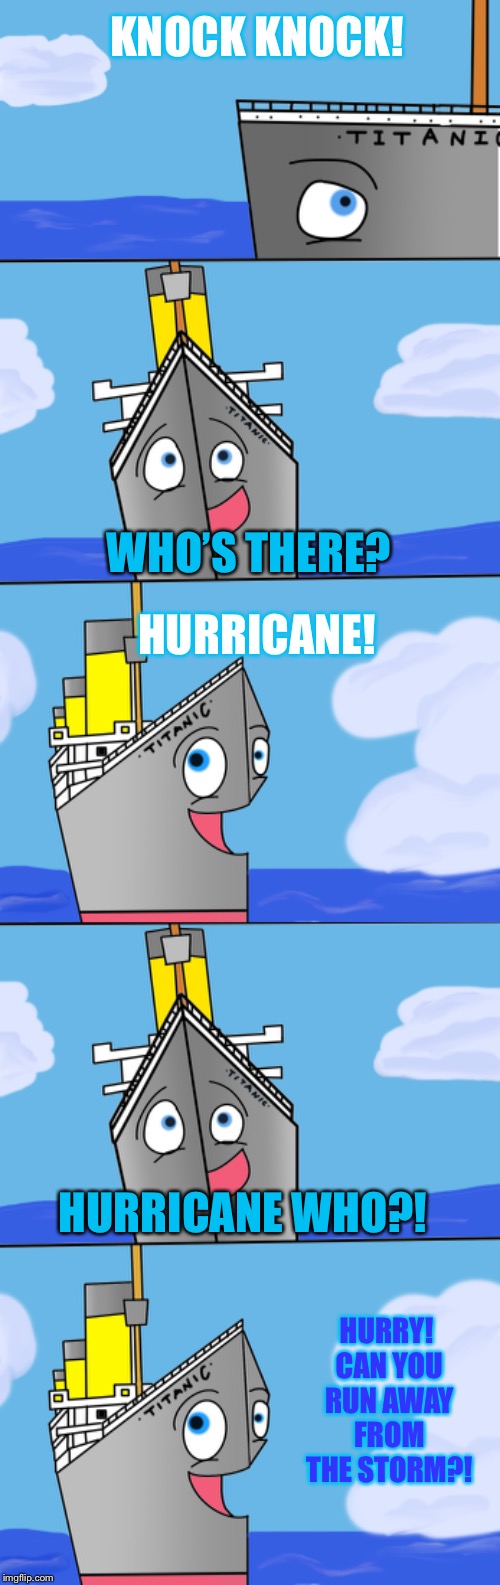 Bad Pun Titanic #21: Hurricane! | KNOCK KNOCK! WHO’S THERE? HURRICANE! HURRICANE WHO?! HURRY! CAN YOU RUN AWAY FROM THE STORM?! | image tagged in bad pun,titanic,hurricane,knock knock,funny joke | made w/ Imgflip meme maker